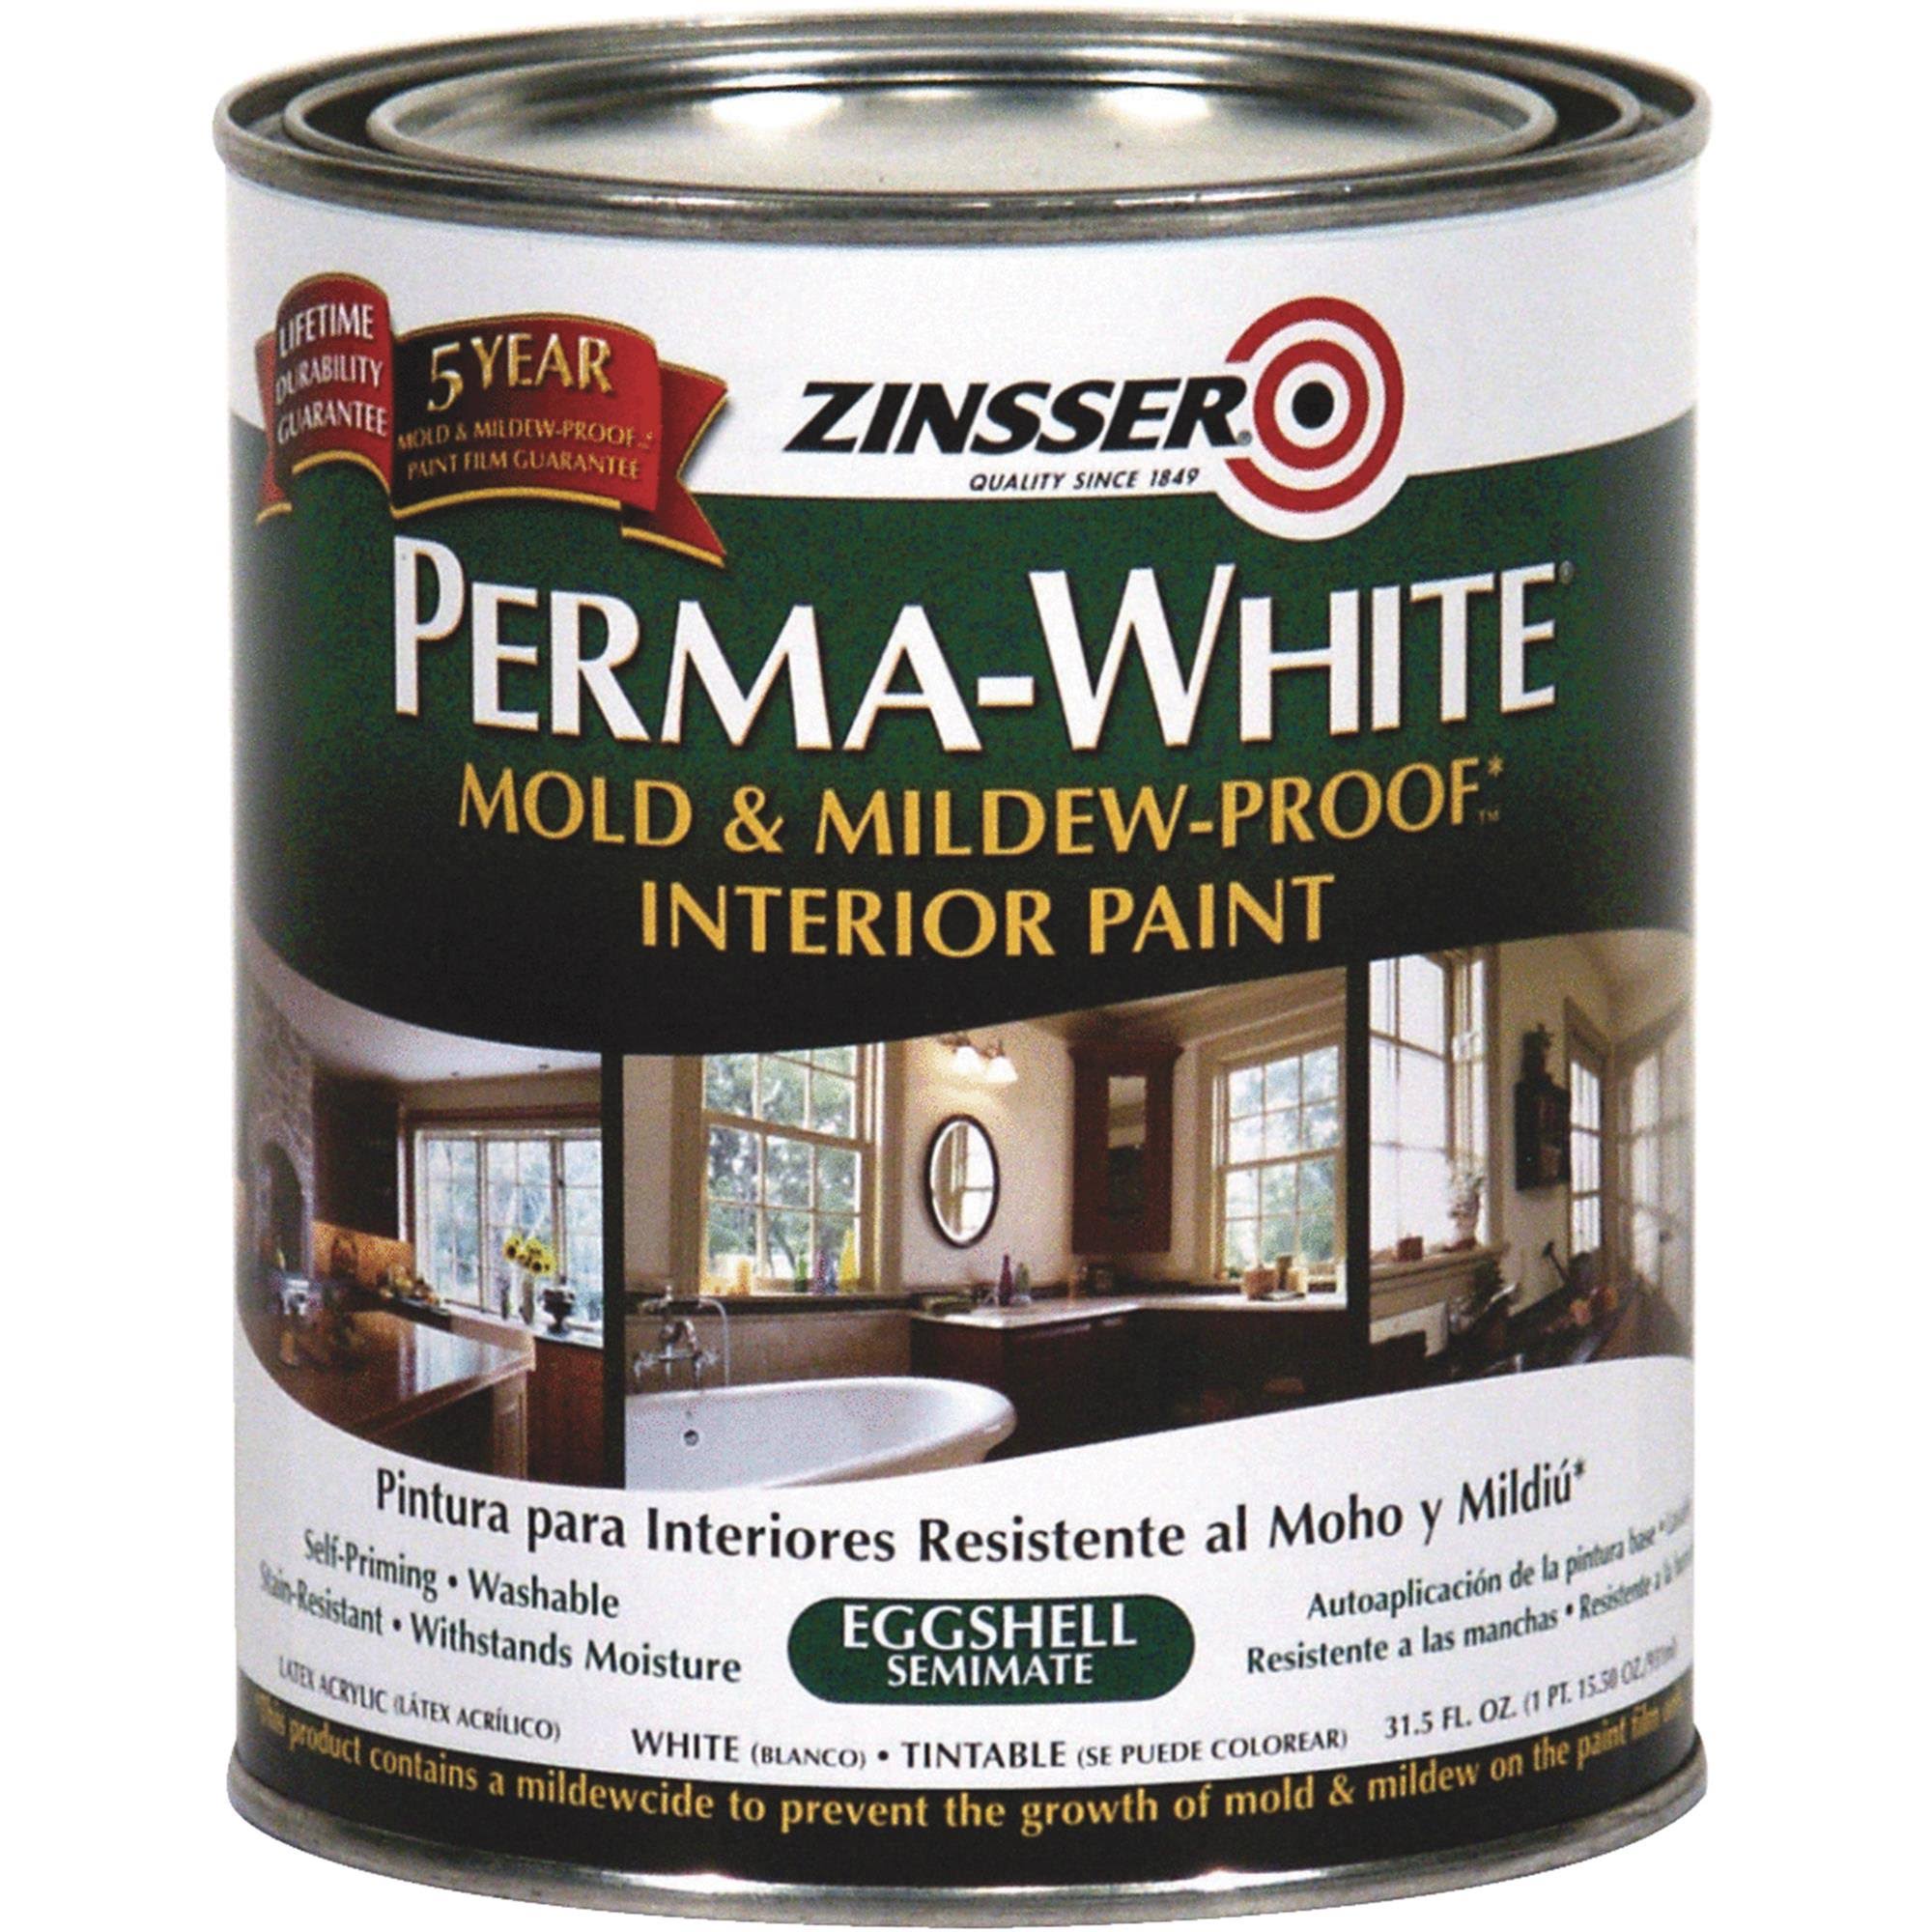 Rust Oleum 2774 Perma-White Mould and Mildew-proof Interior Paint | Garage | Free Shipping on All Orders | Delivery Guaranteed | Best Price Guarantee